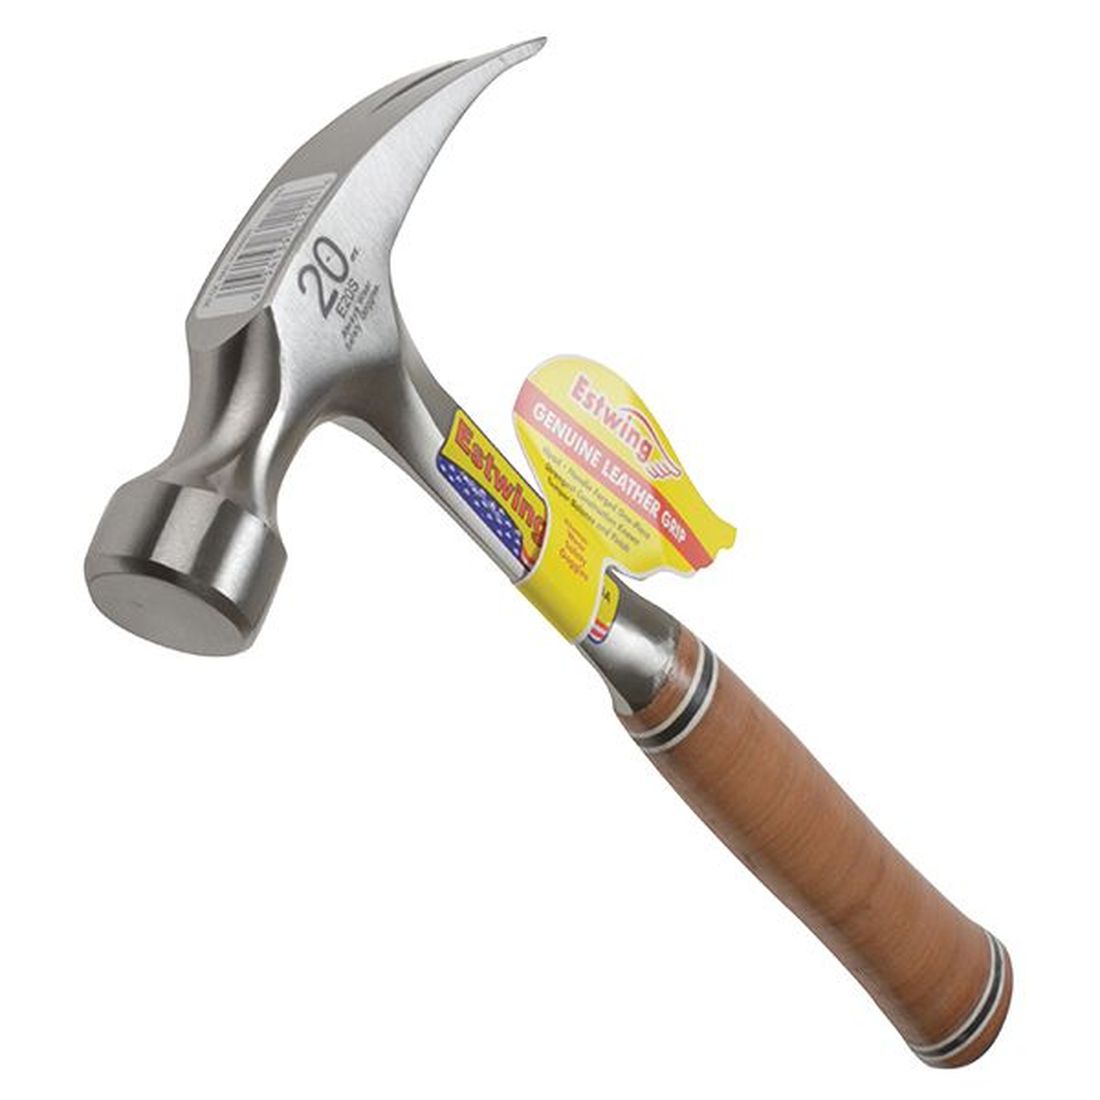 Estwing E20S Straight Claw Hammer - Leather Grip 560g (20oz)                            